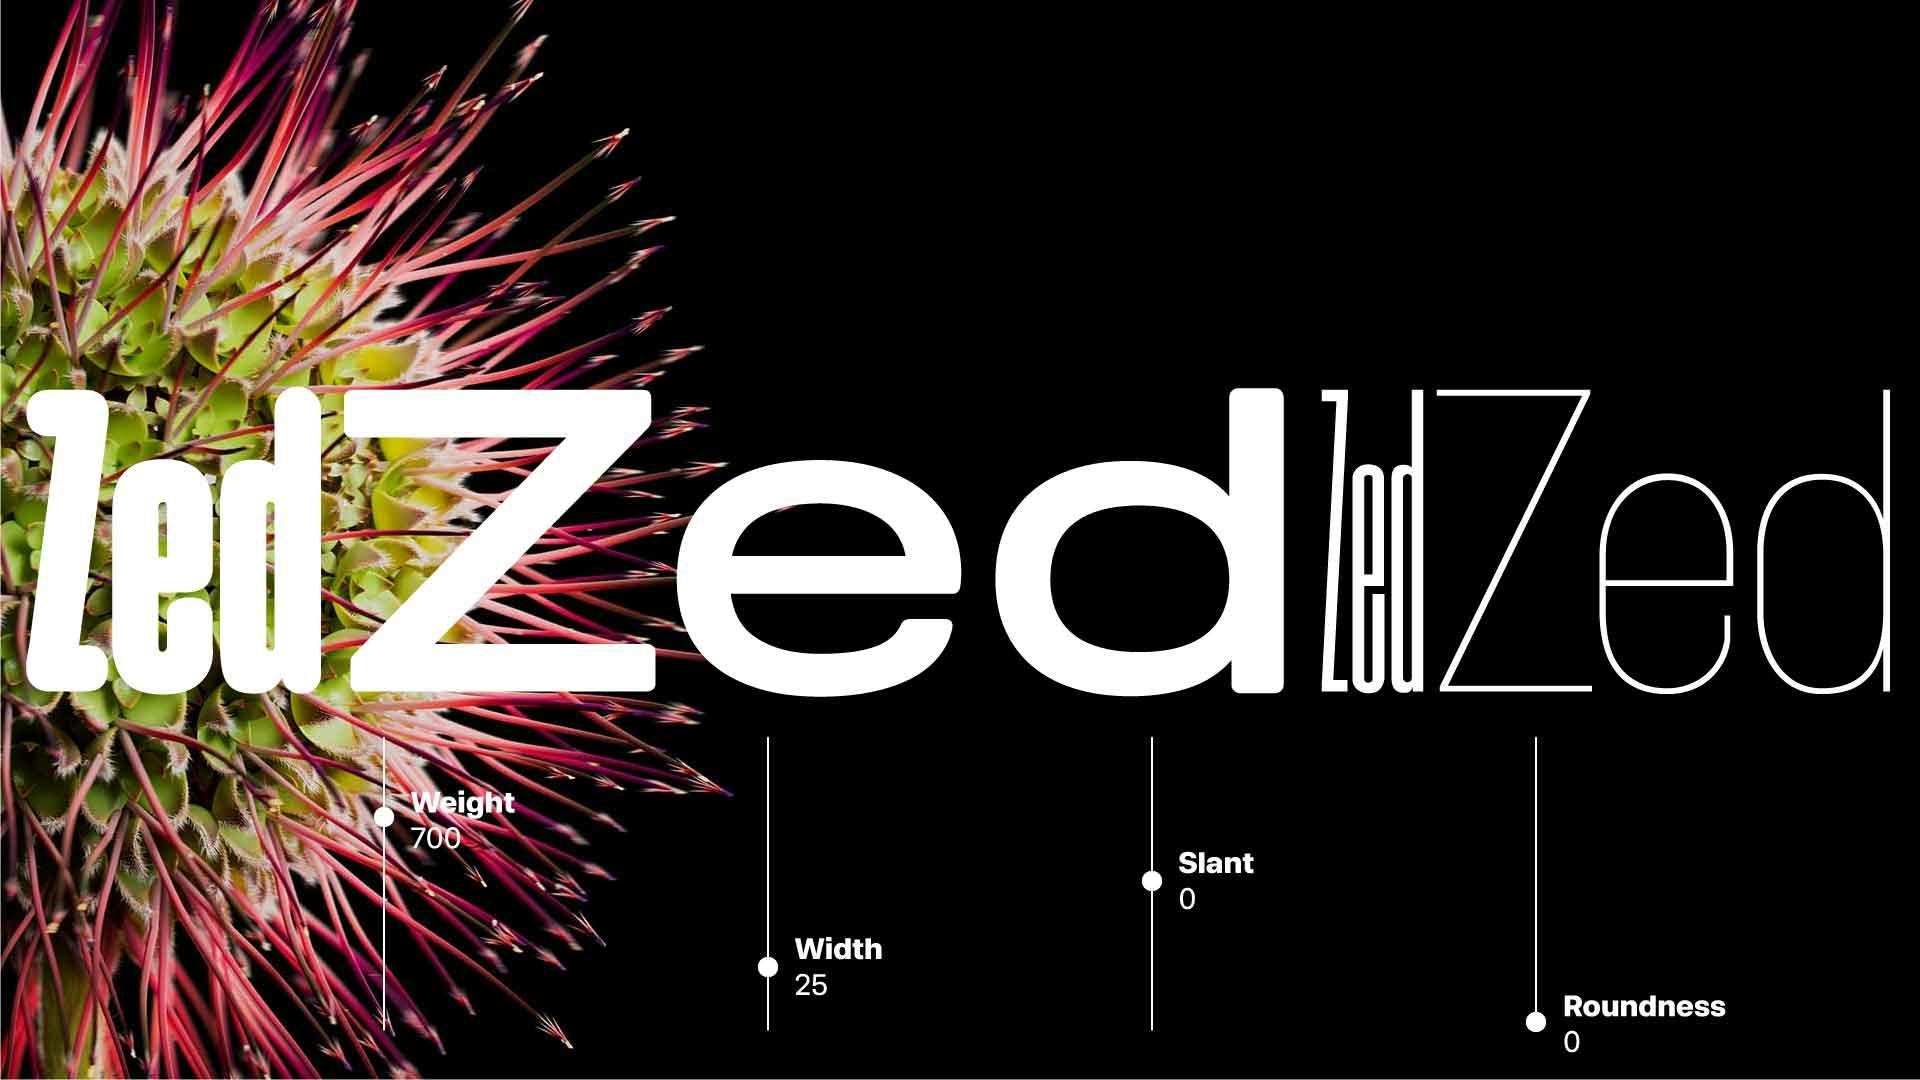 Zed cover stories